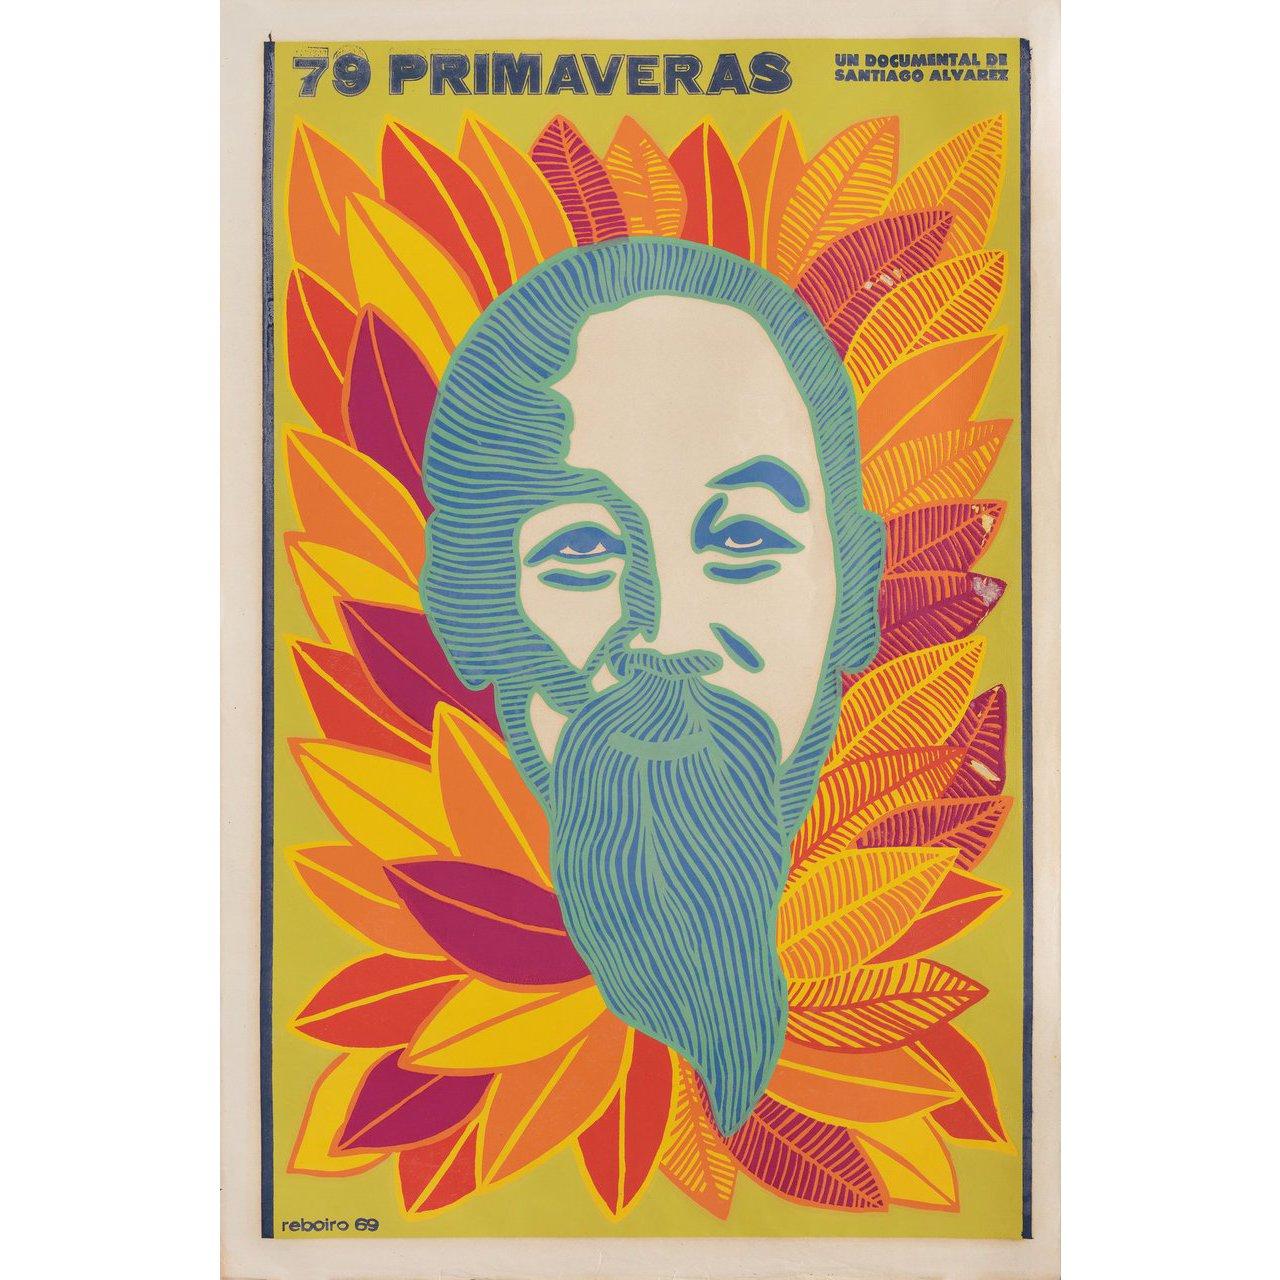 Original 1970 Cuban poster by Antonio Fernandez Reboiro for the film 79 Springtimes (79 primaveras) directed by Santiago Alvarez with Ho Chi Minh. Very Good condition, rolled with repaired tears & some surface damage. Please note: the size is stated